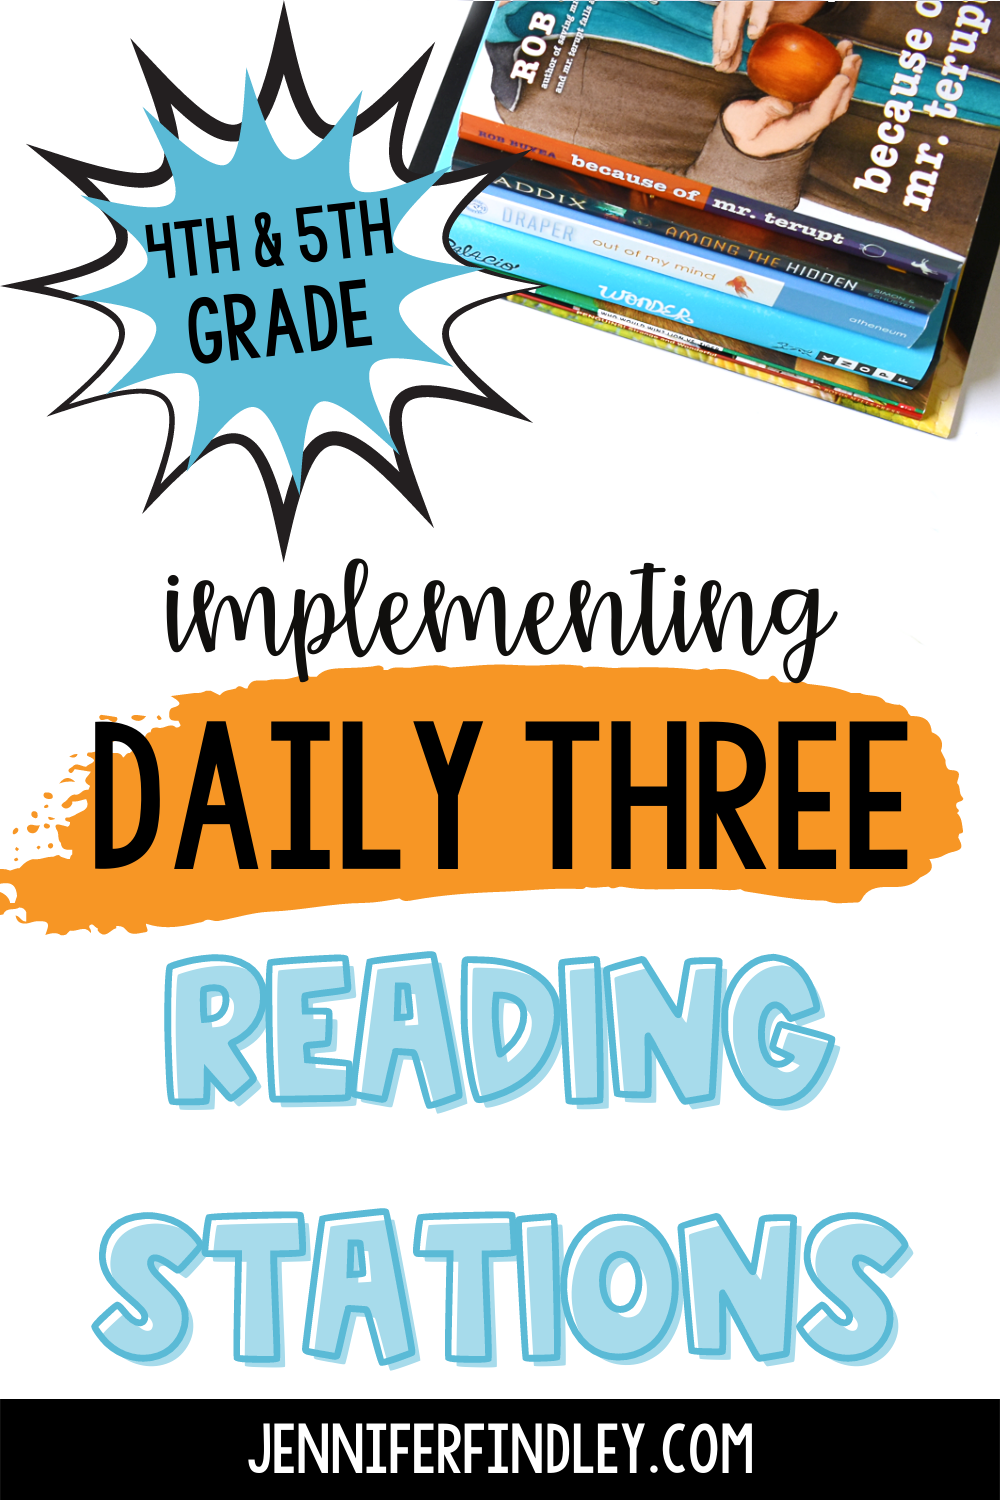 Daily 3 reading in 4th and 5th grade! Thinking about implementing a Daily Three reading structure for reading rotations? Check out this post for details and example activities for each rotation.